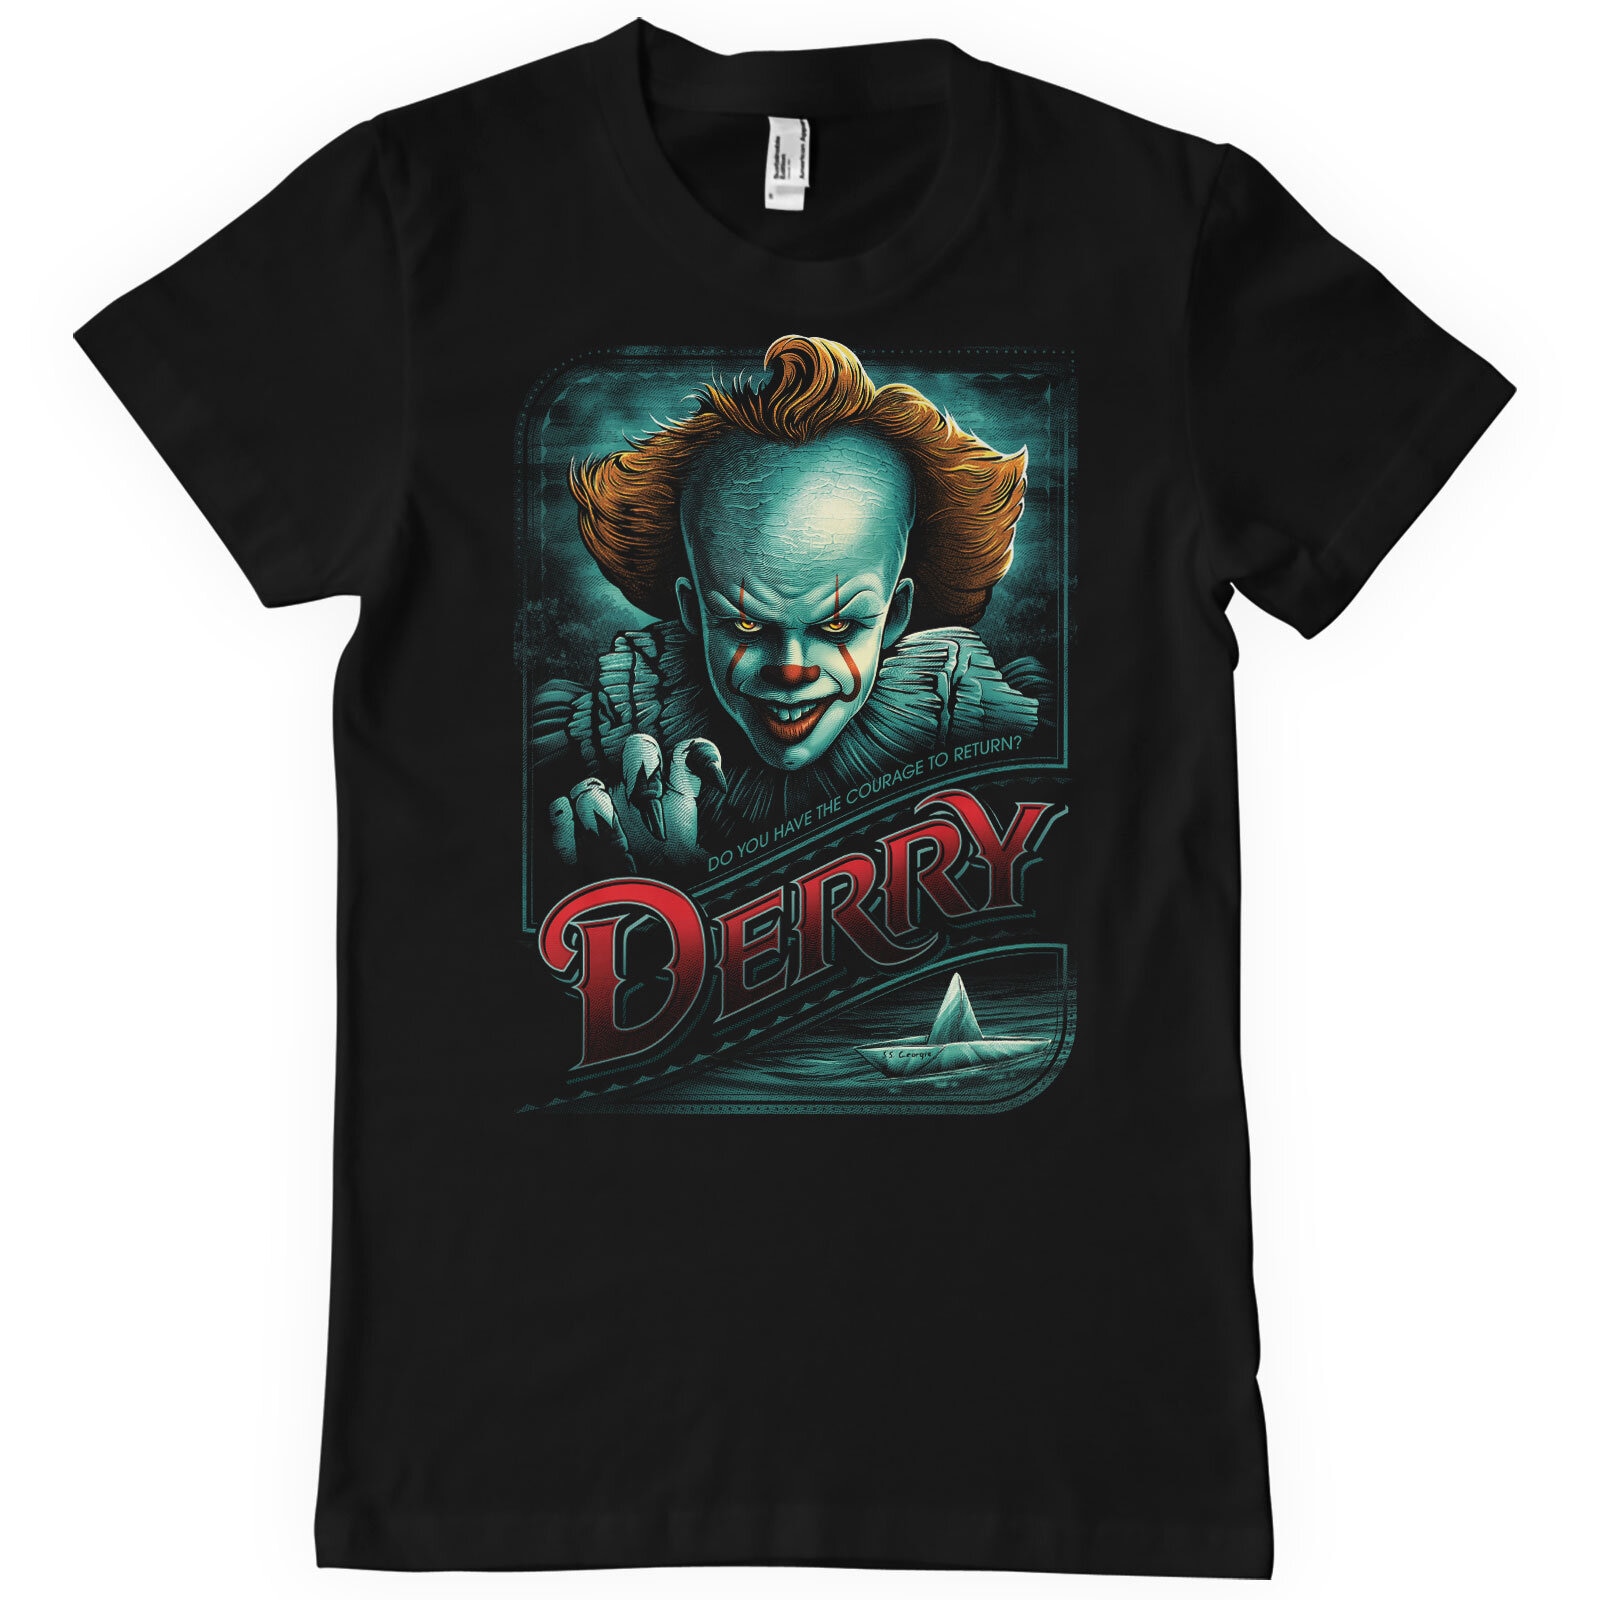 IT - Pennywise in Derry T-Shirt